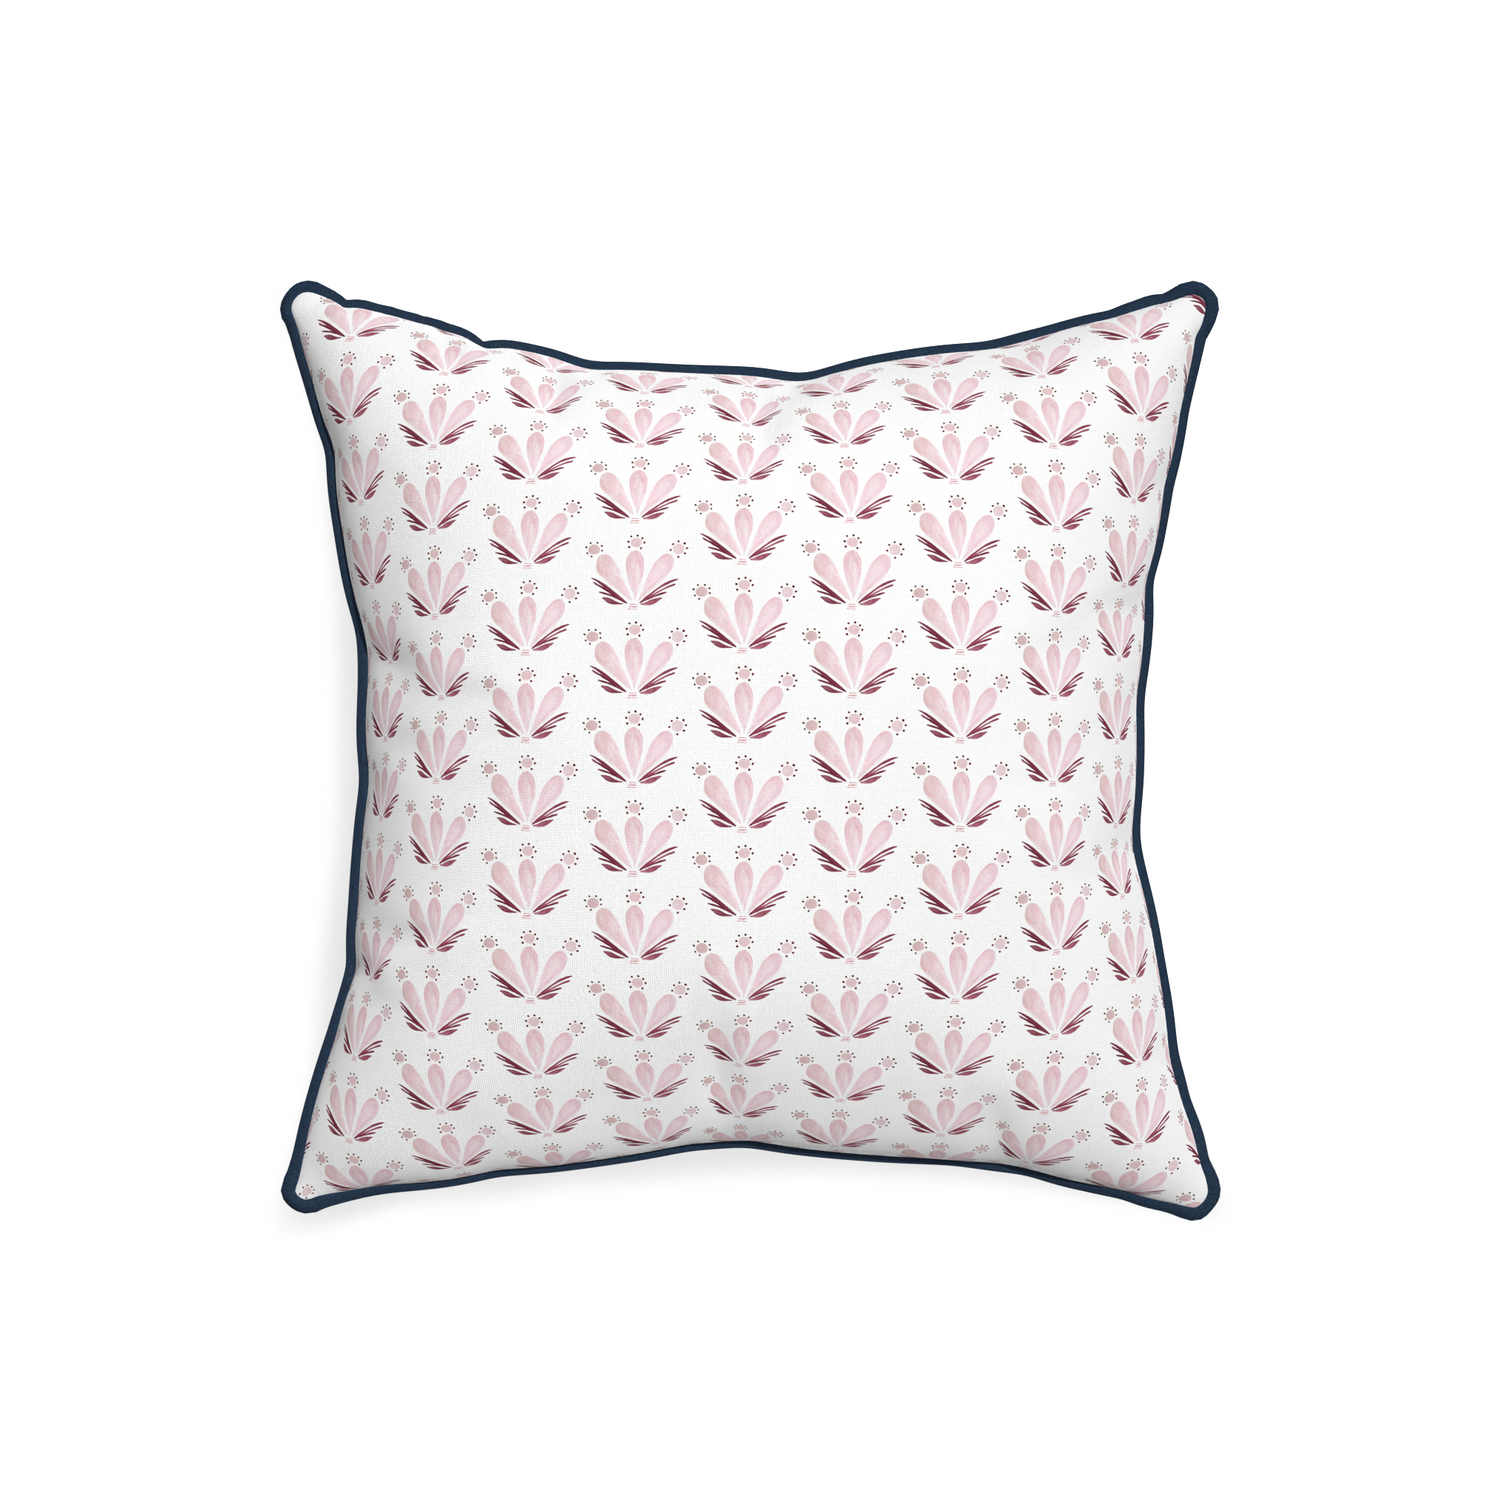 20-square serena pink custom pink & burgundy drop repeat floralpillow with c piping on white background